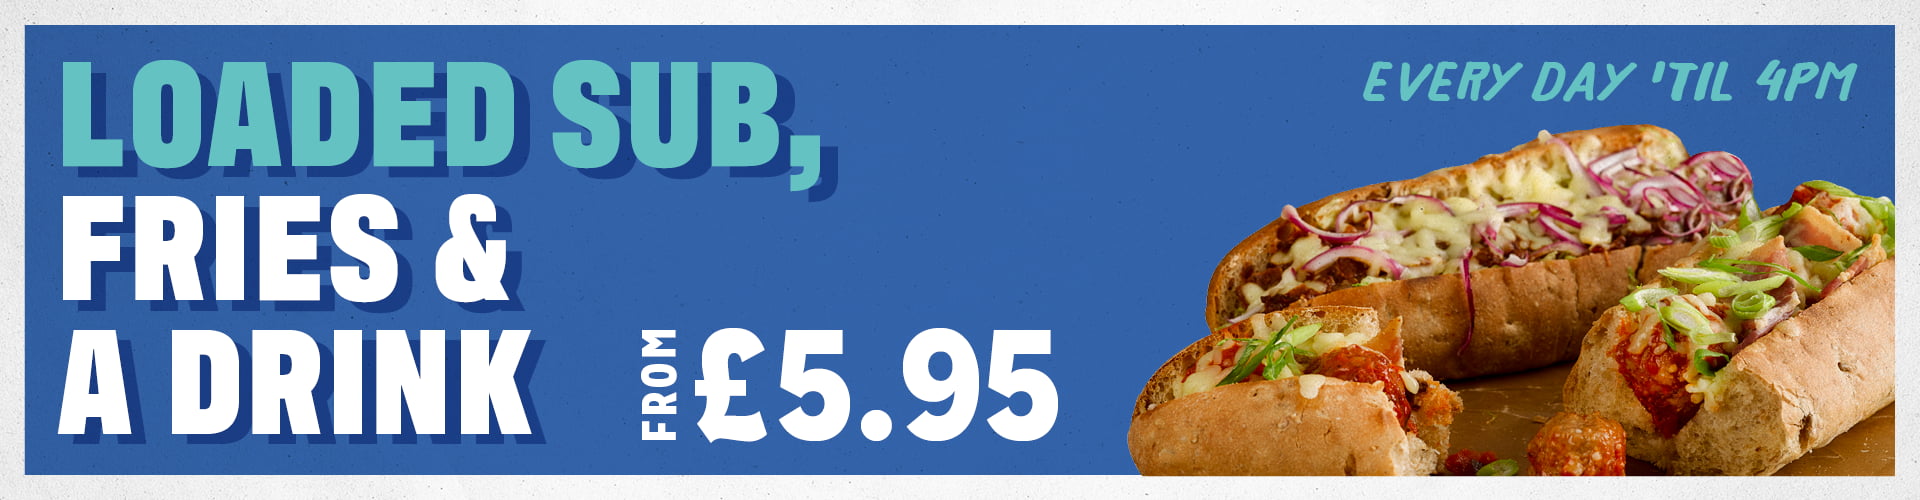 Loaded Sub, Fries & A Drink - From £5.95. Every Day Til 4pm.